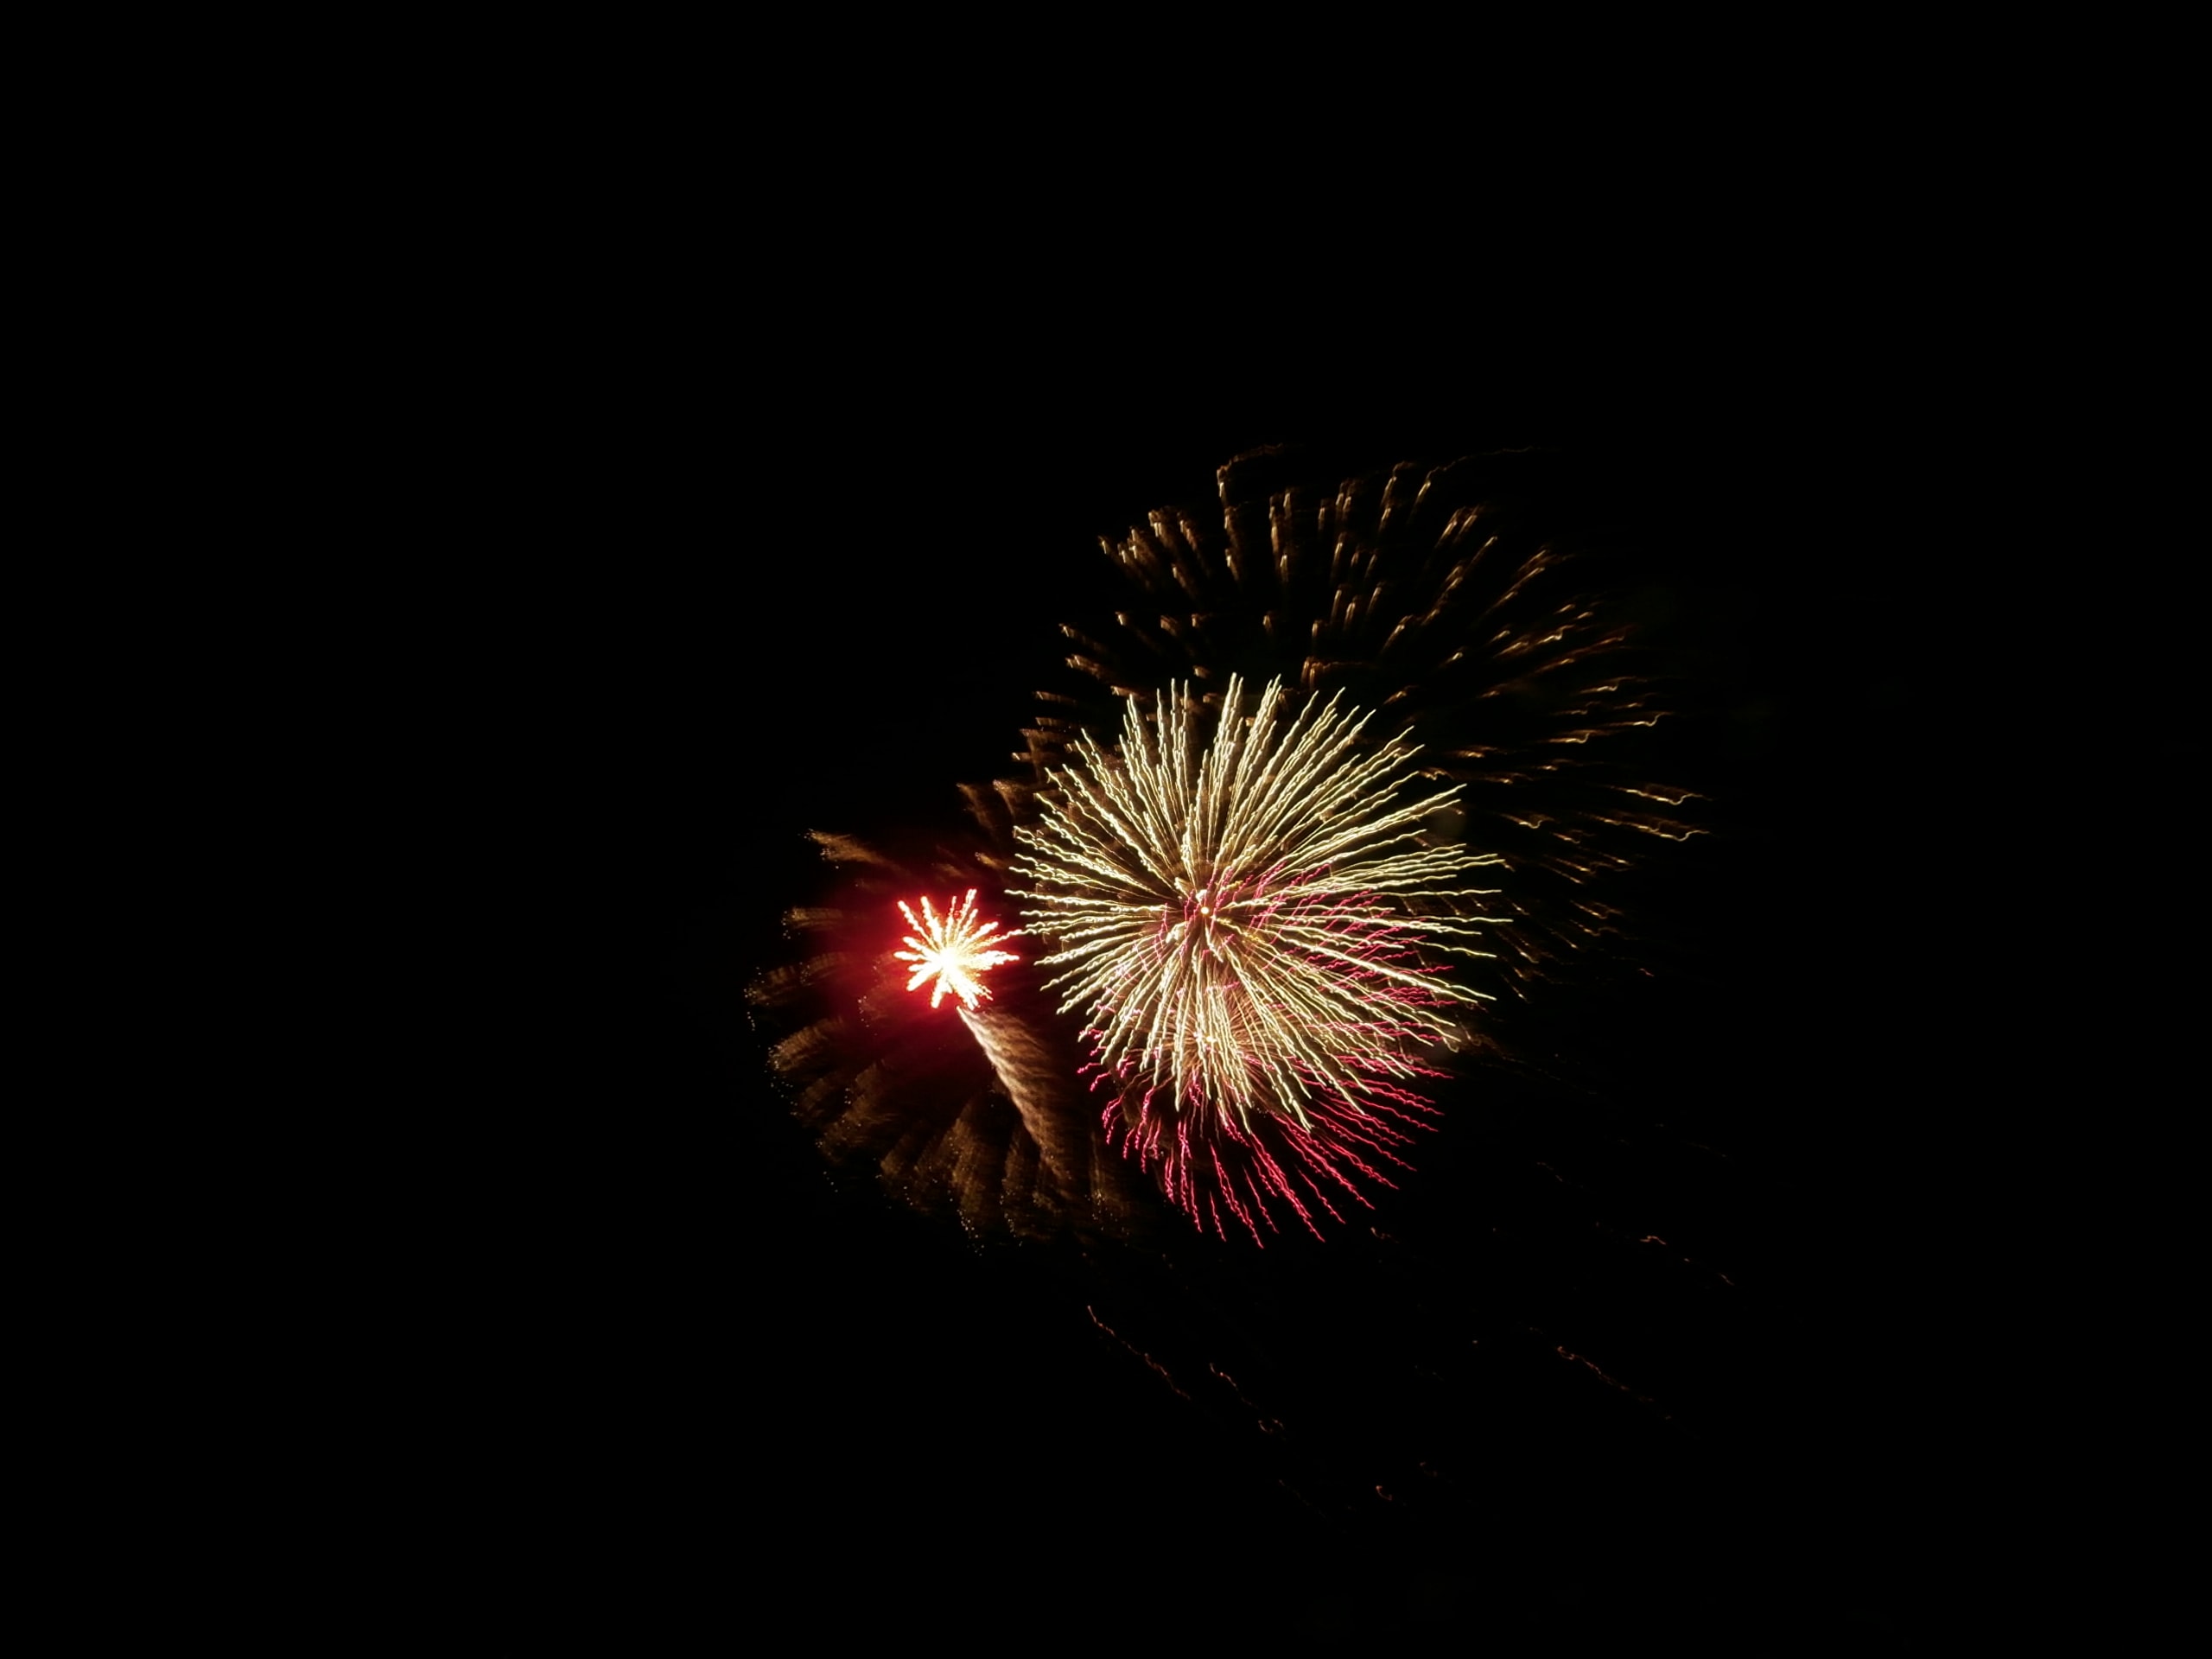 Fireworks - Outer Banks, NC 2014